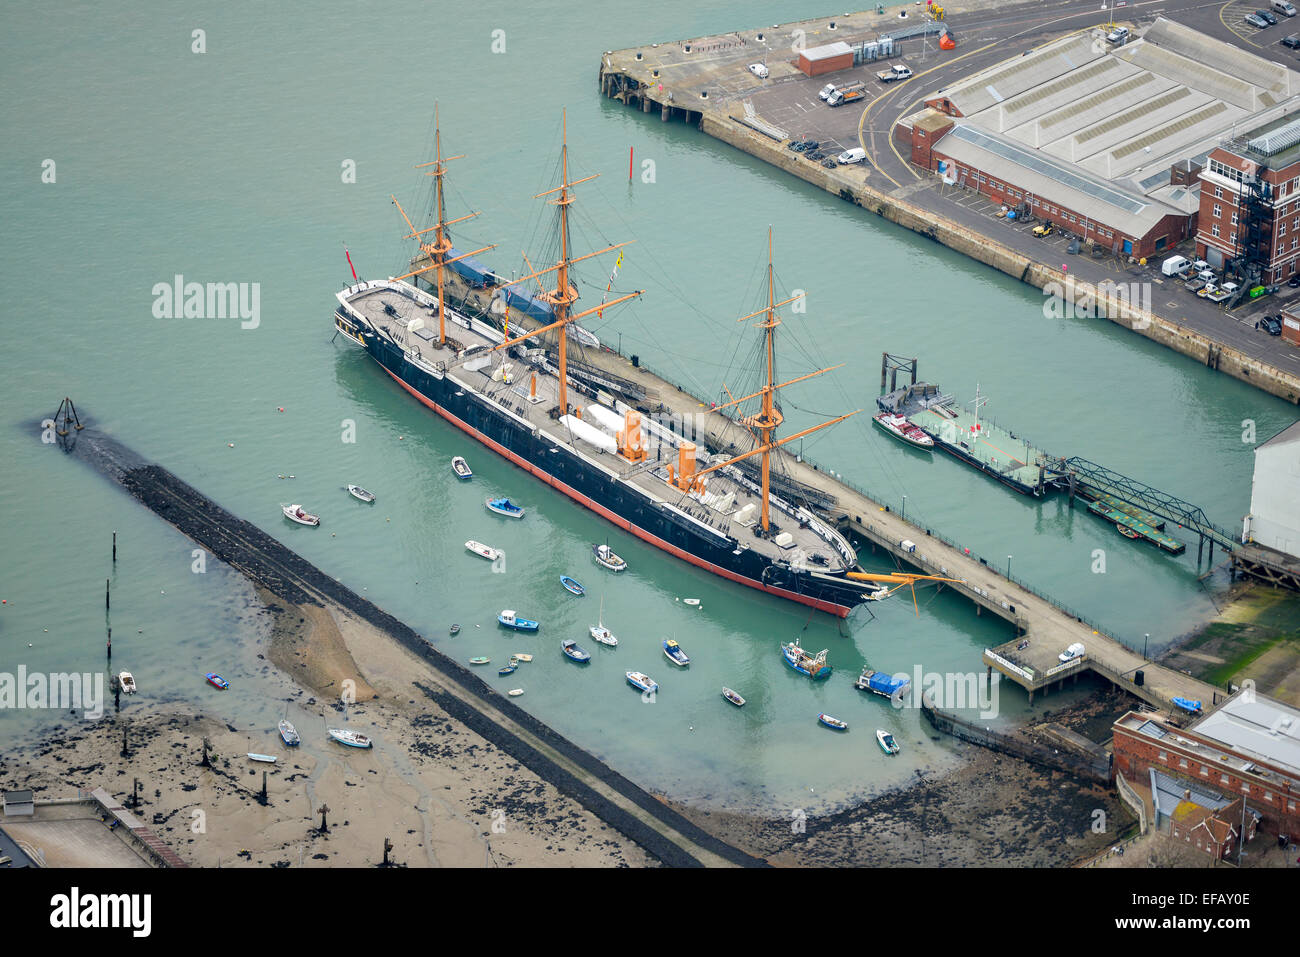 An aerial view of HMS Warrior. The first Royal Navy battleship made of Iron, now a museum ship in Portsmouth Stock Photo